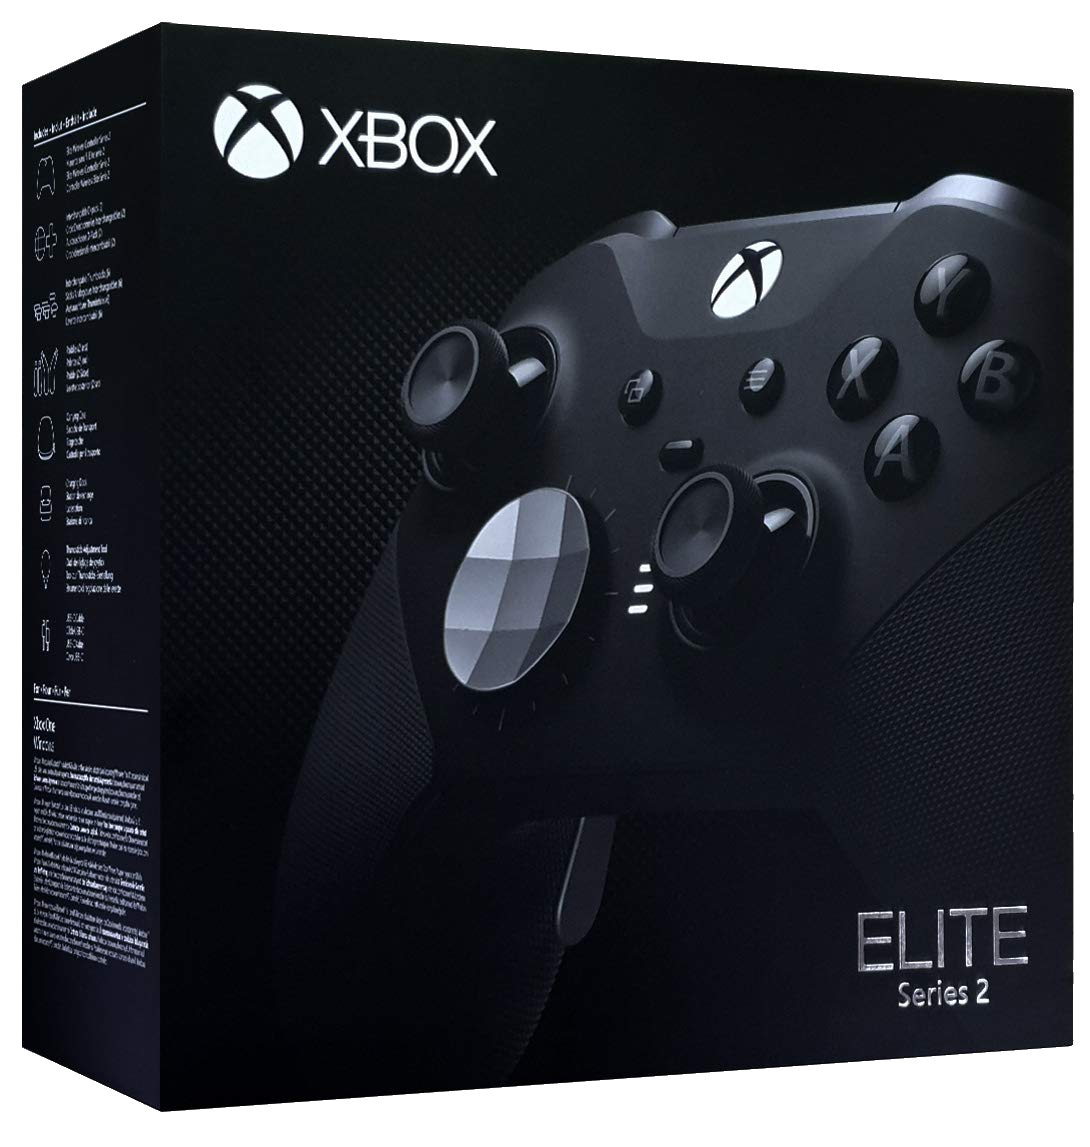 https://static.wikia.nocookie.net/xbox/images/e/ef/Elite-series-2-packaging.png/revision/latest?cb=20200902022818